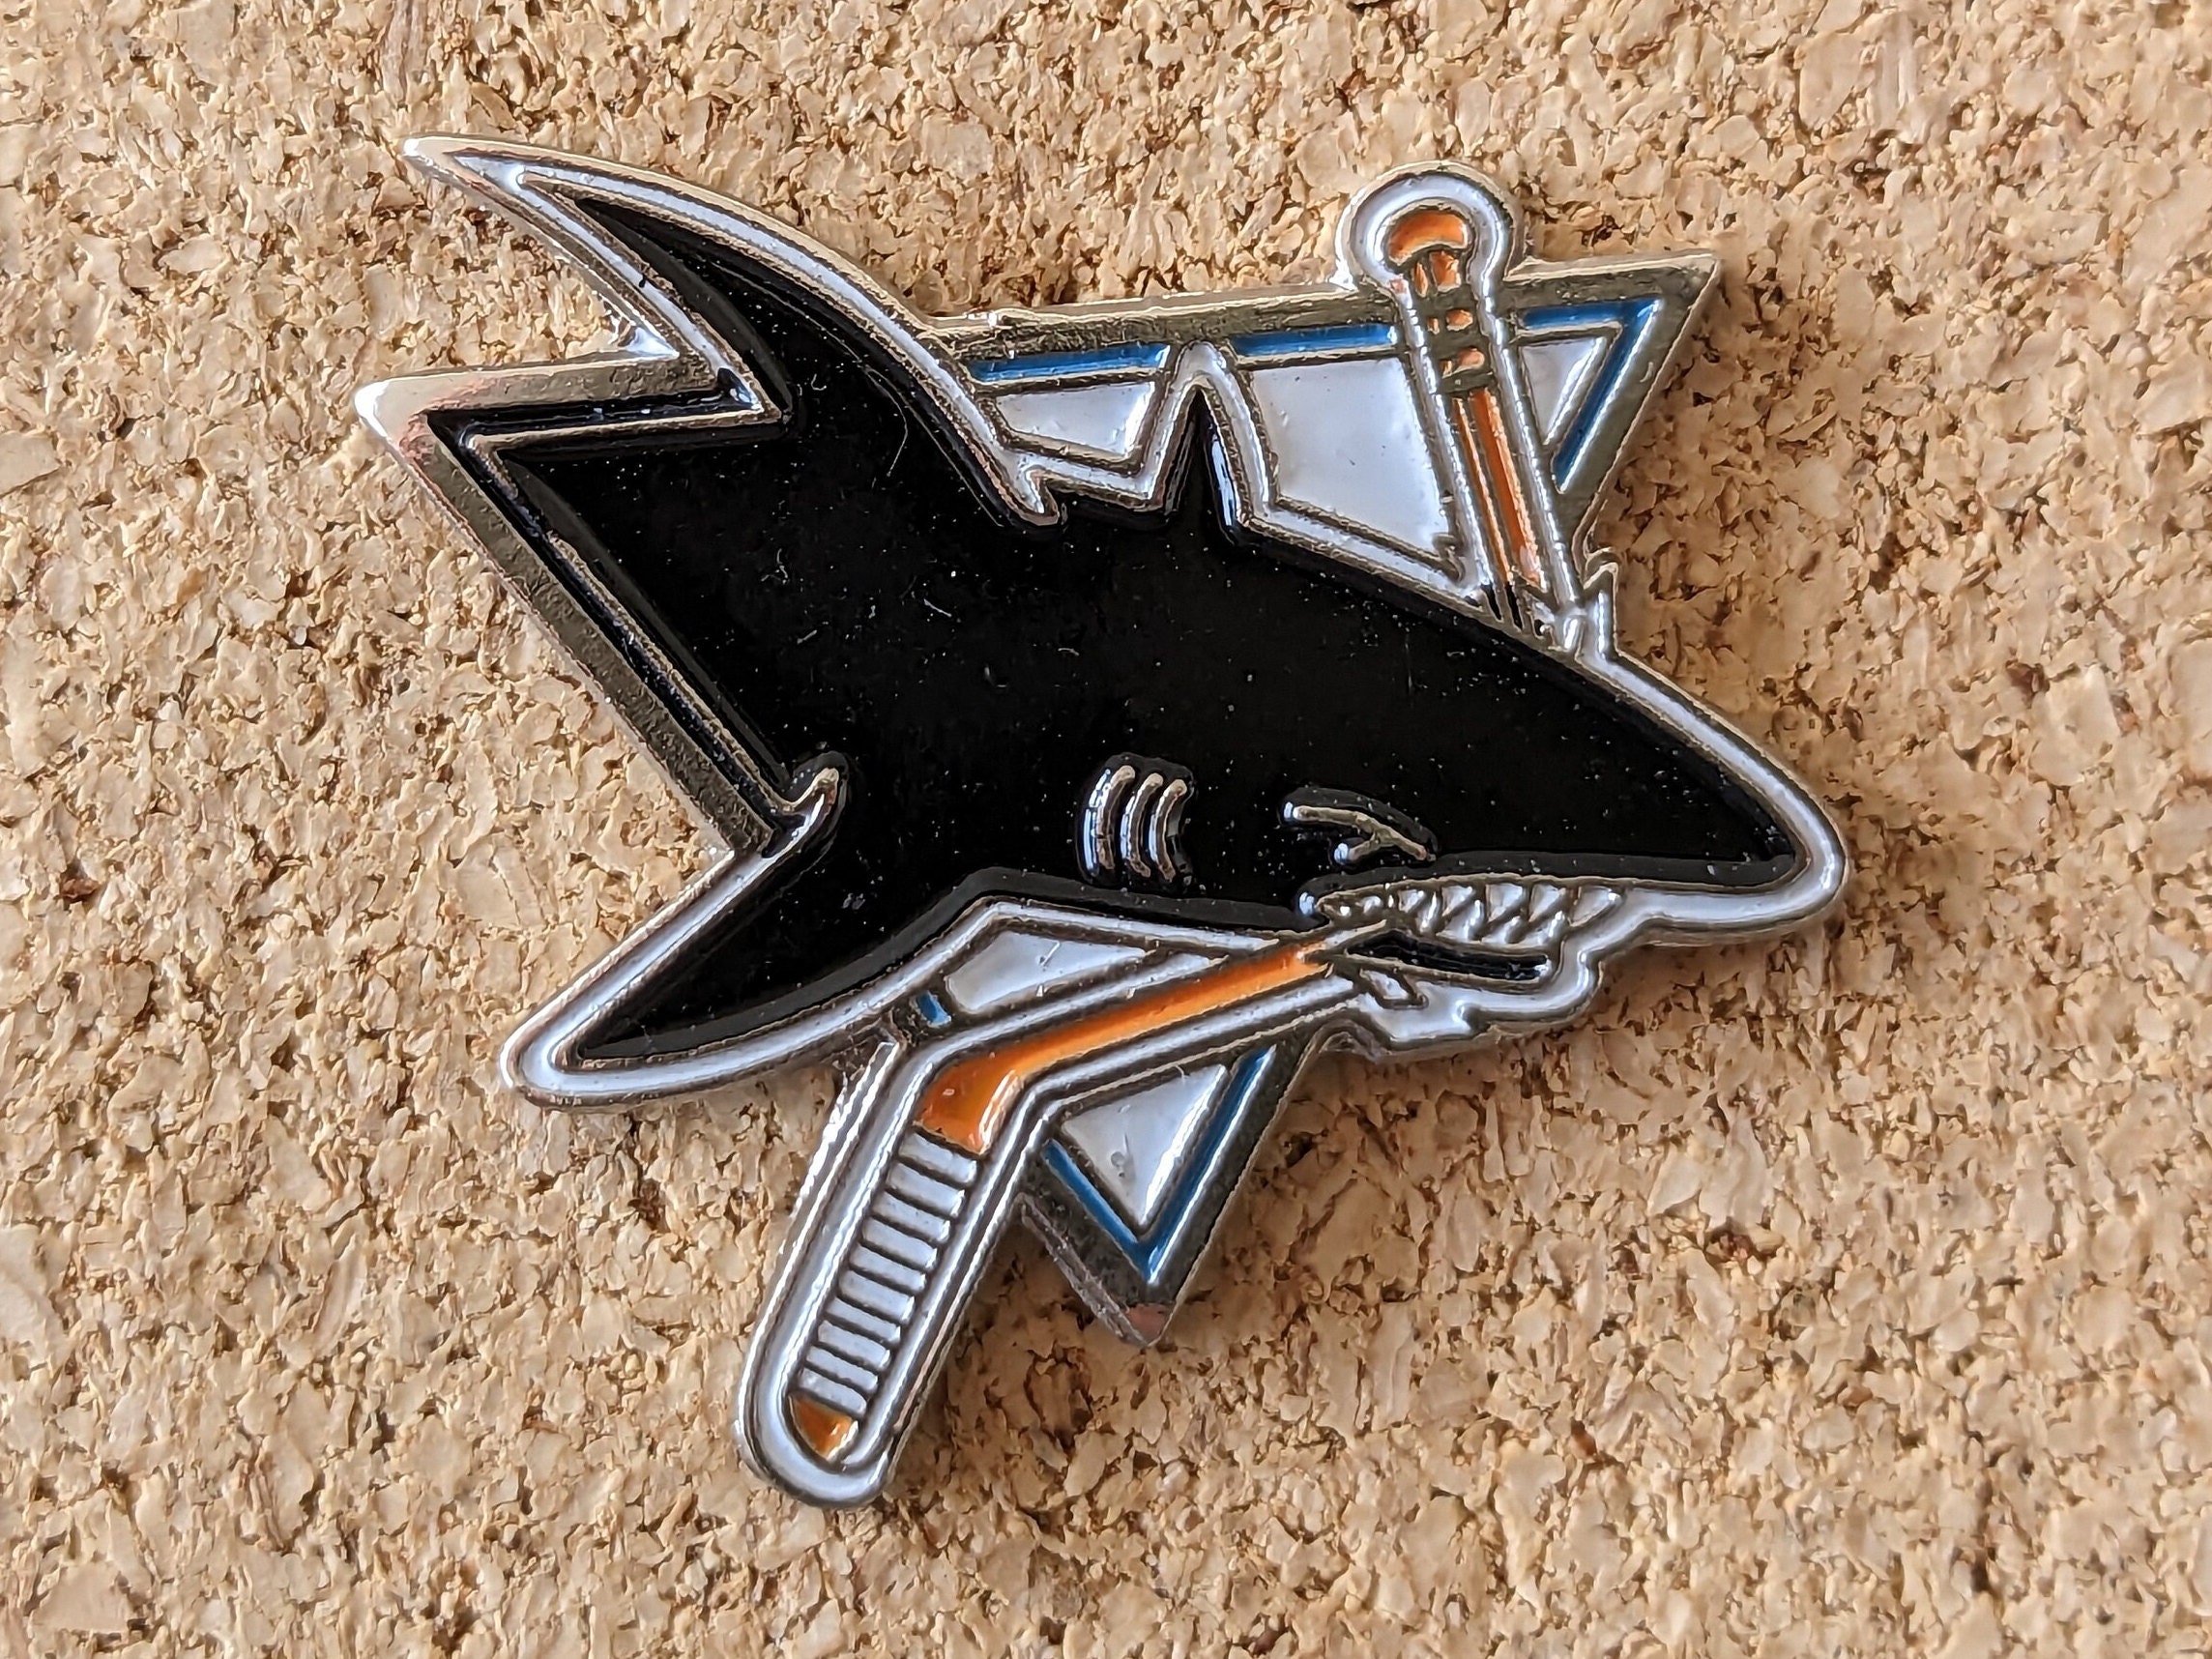 Sharks unveil new logos, commemorative patches for 25th anniversary season  – The Mercury News